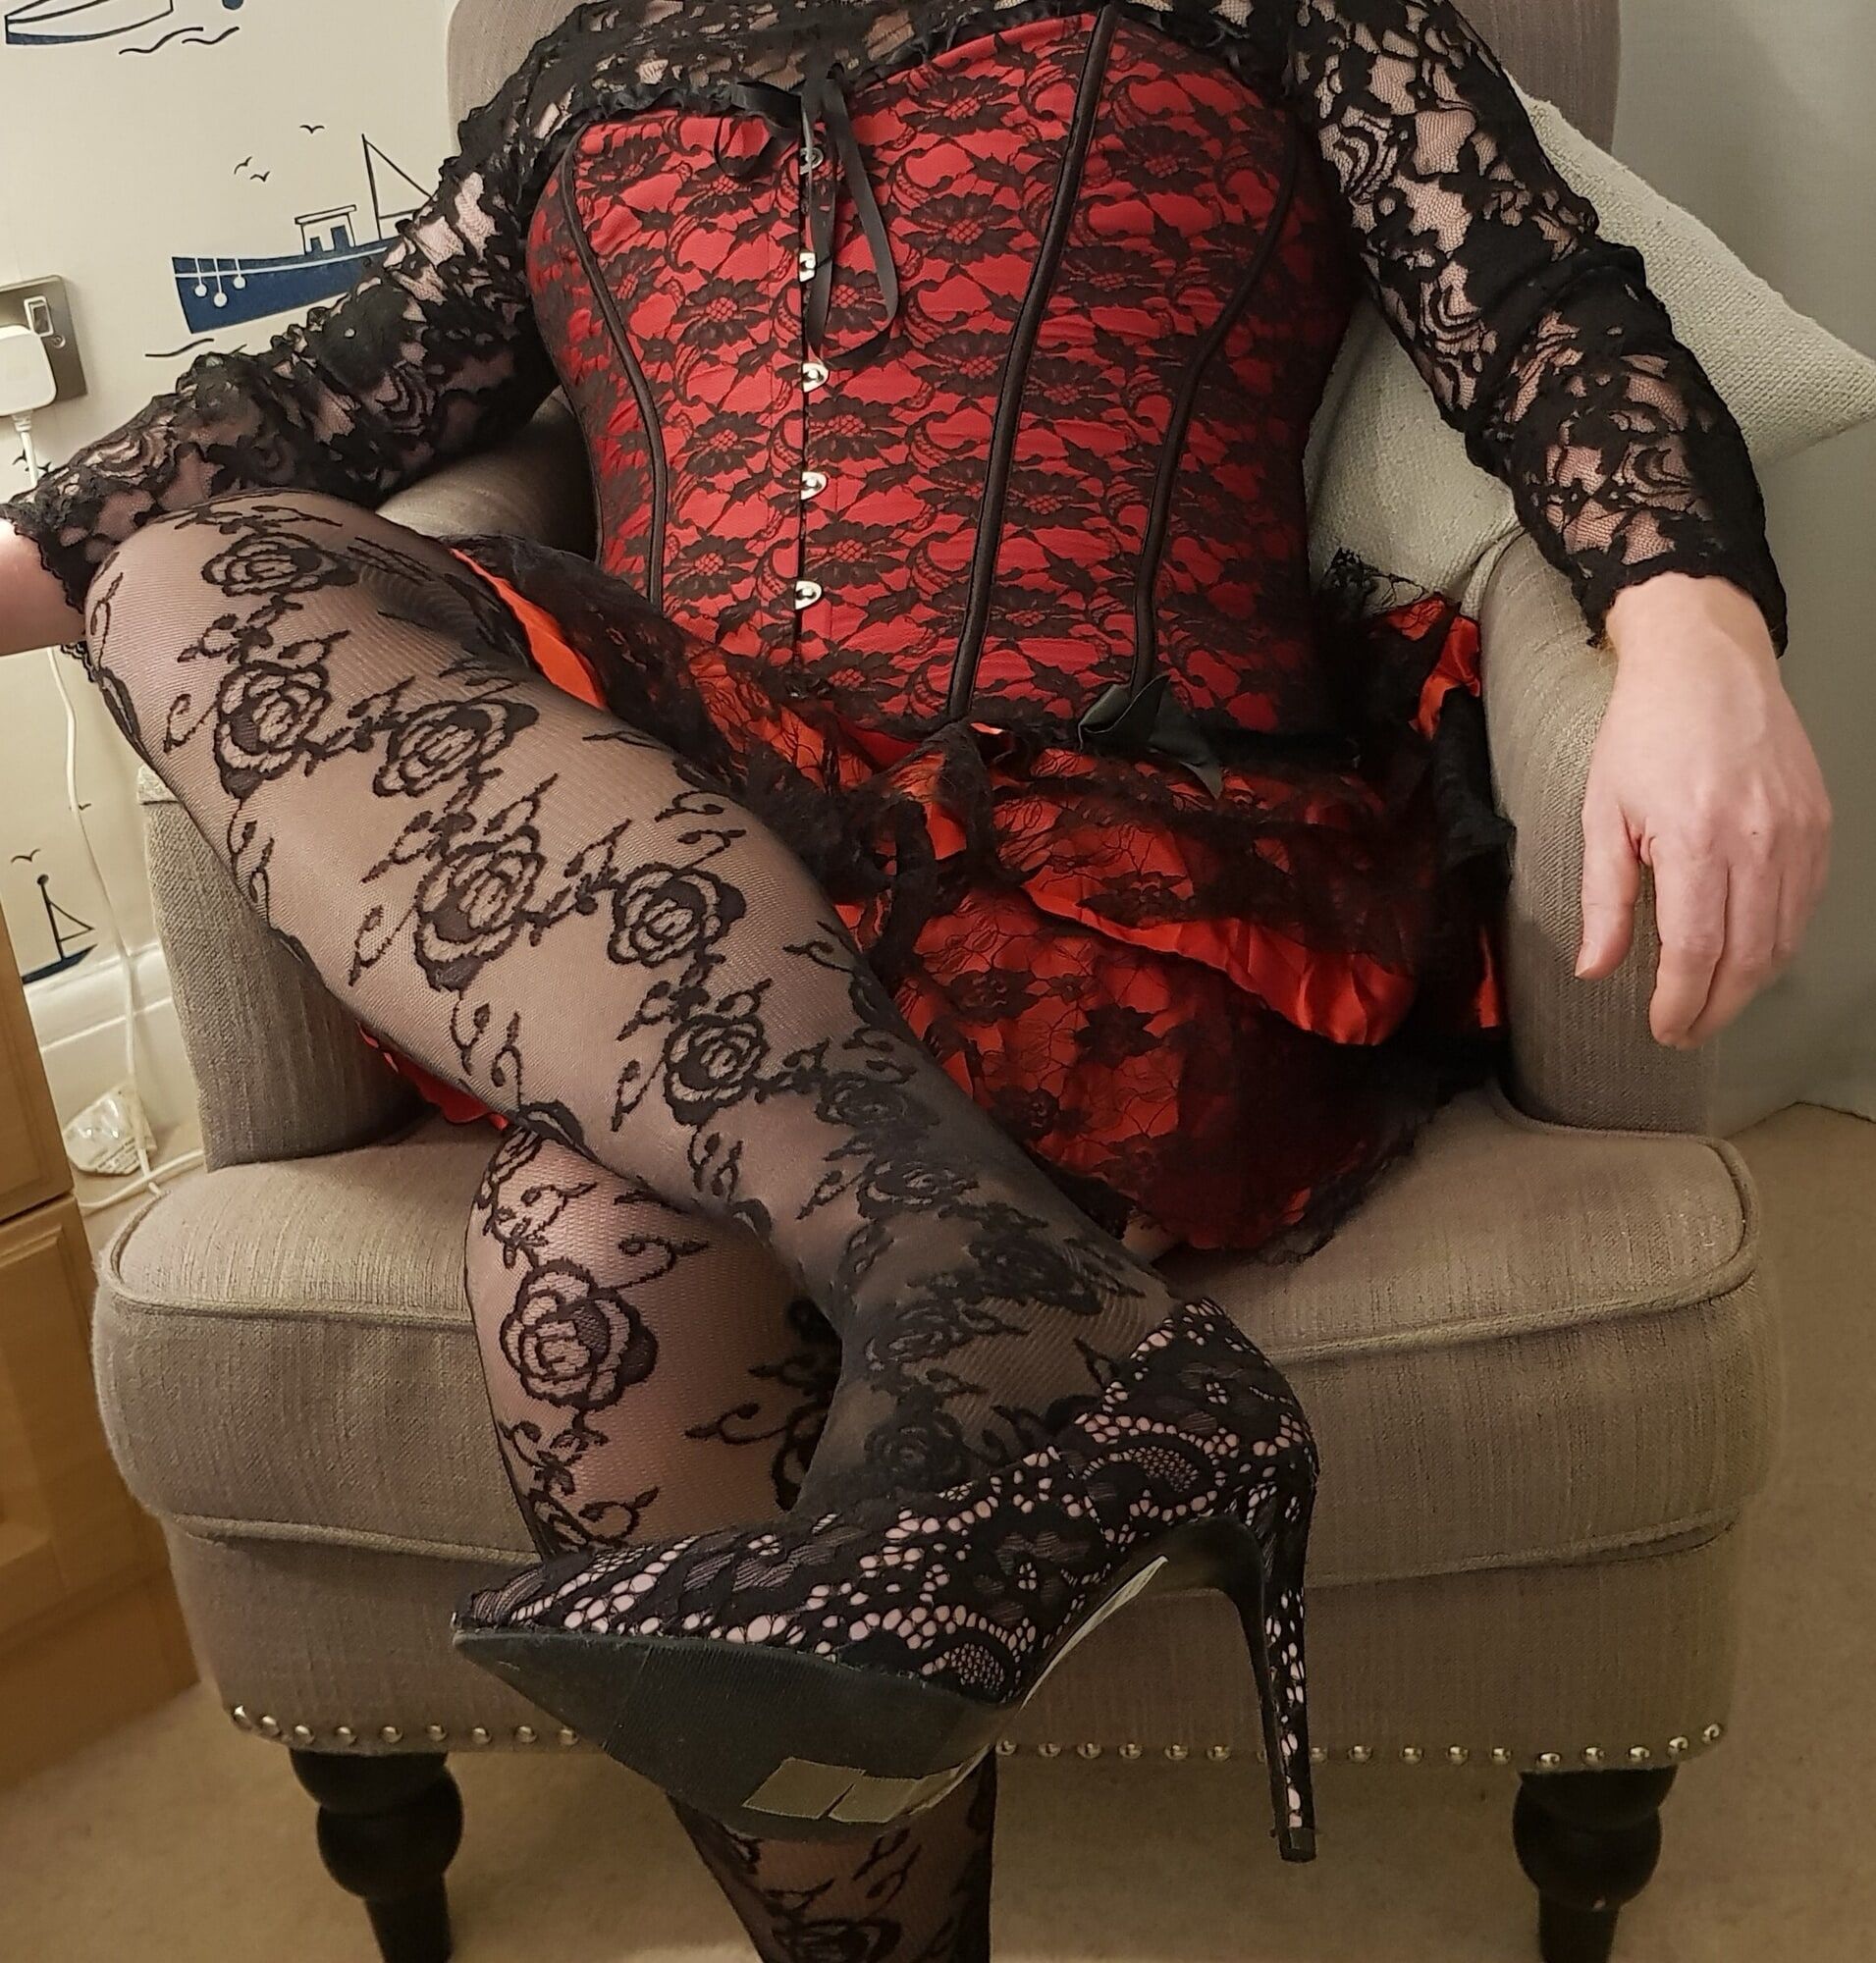 Crossdressing in floral lace lingerie, skirt and heels #9